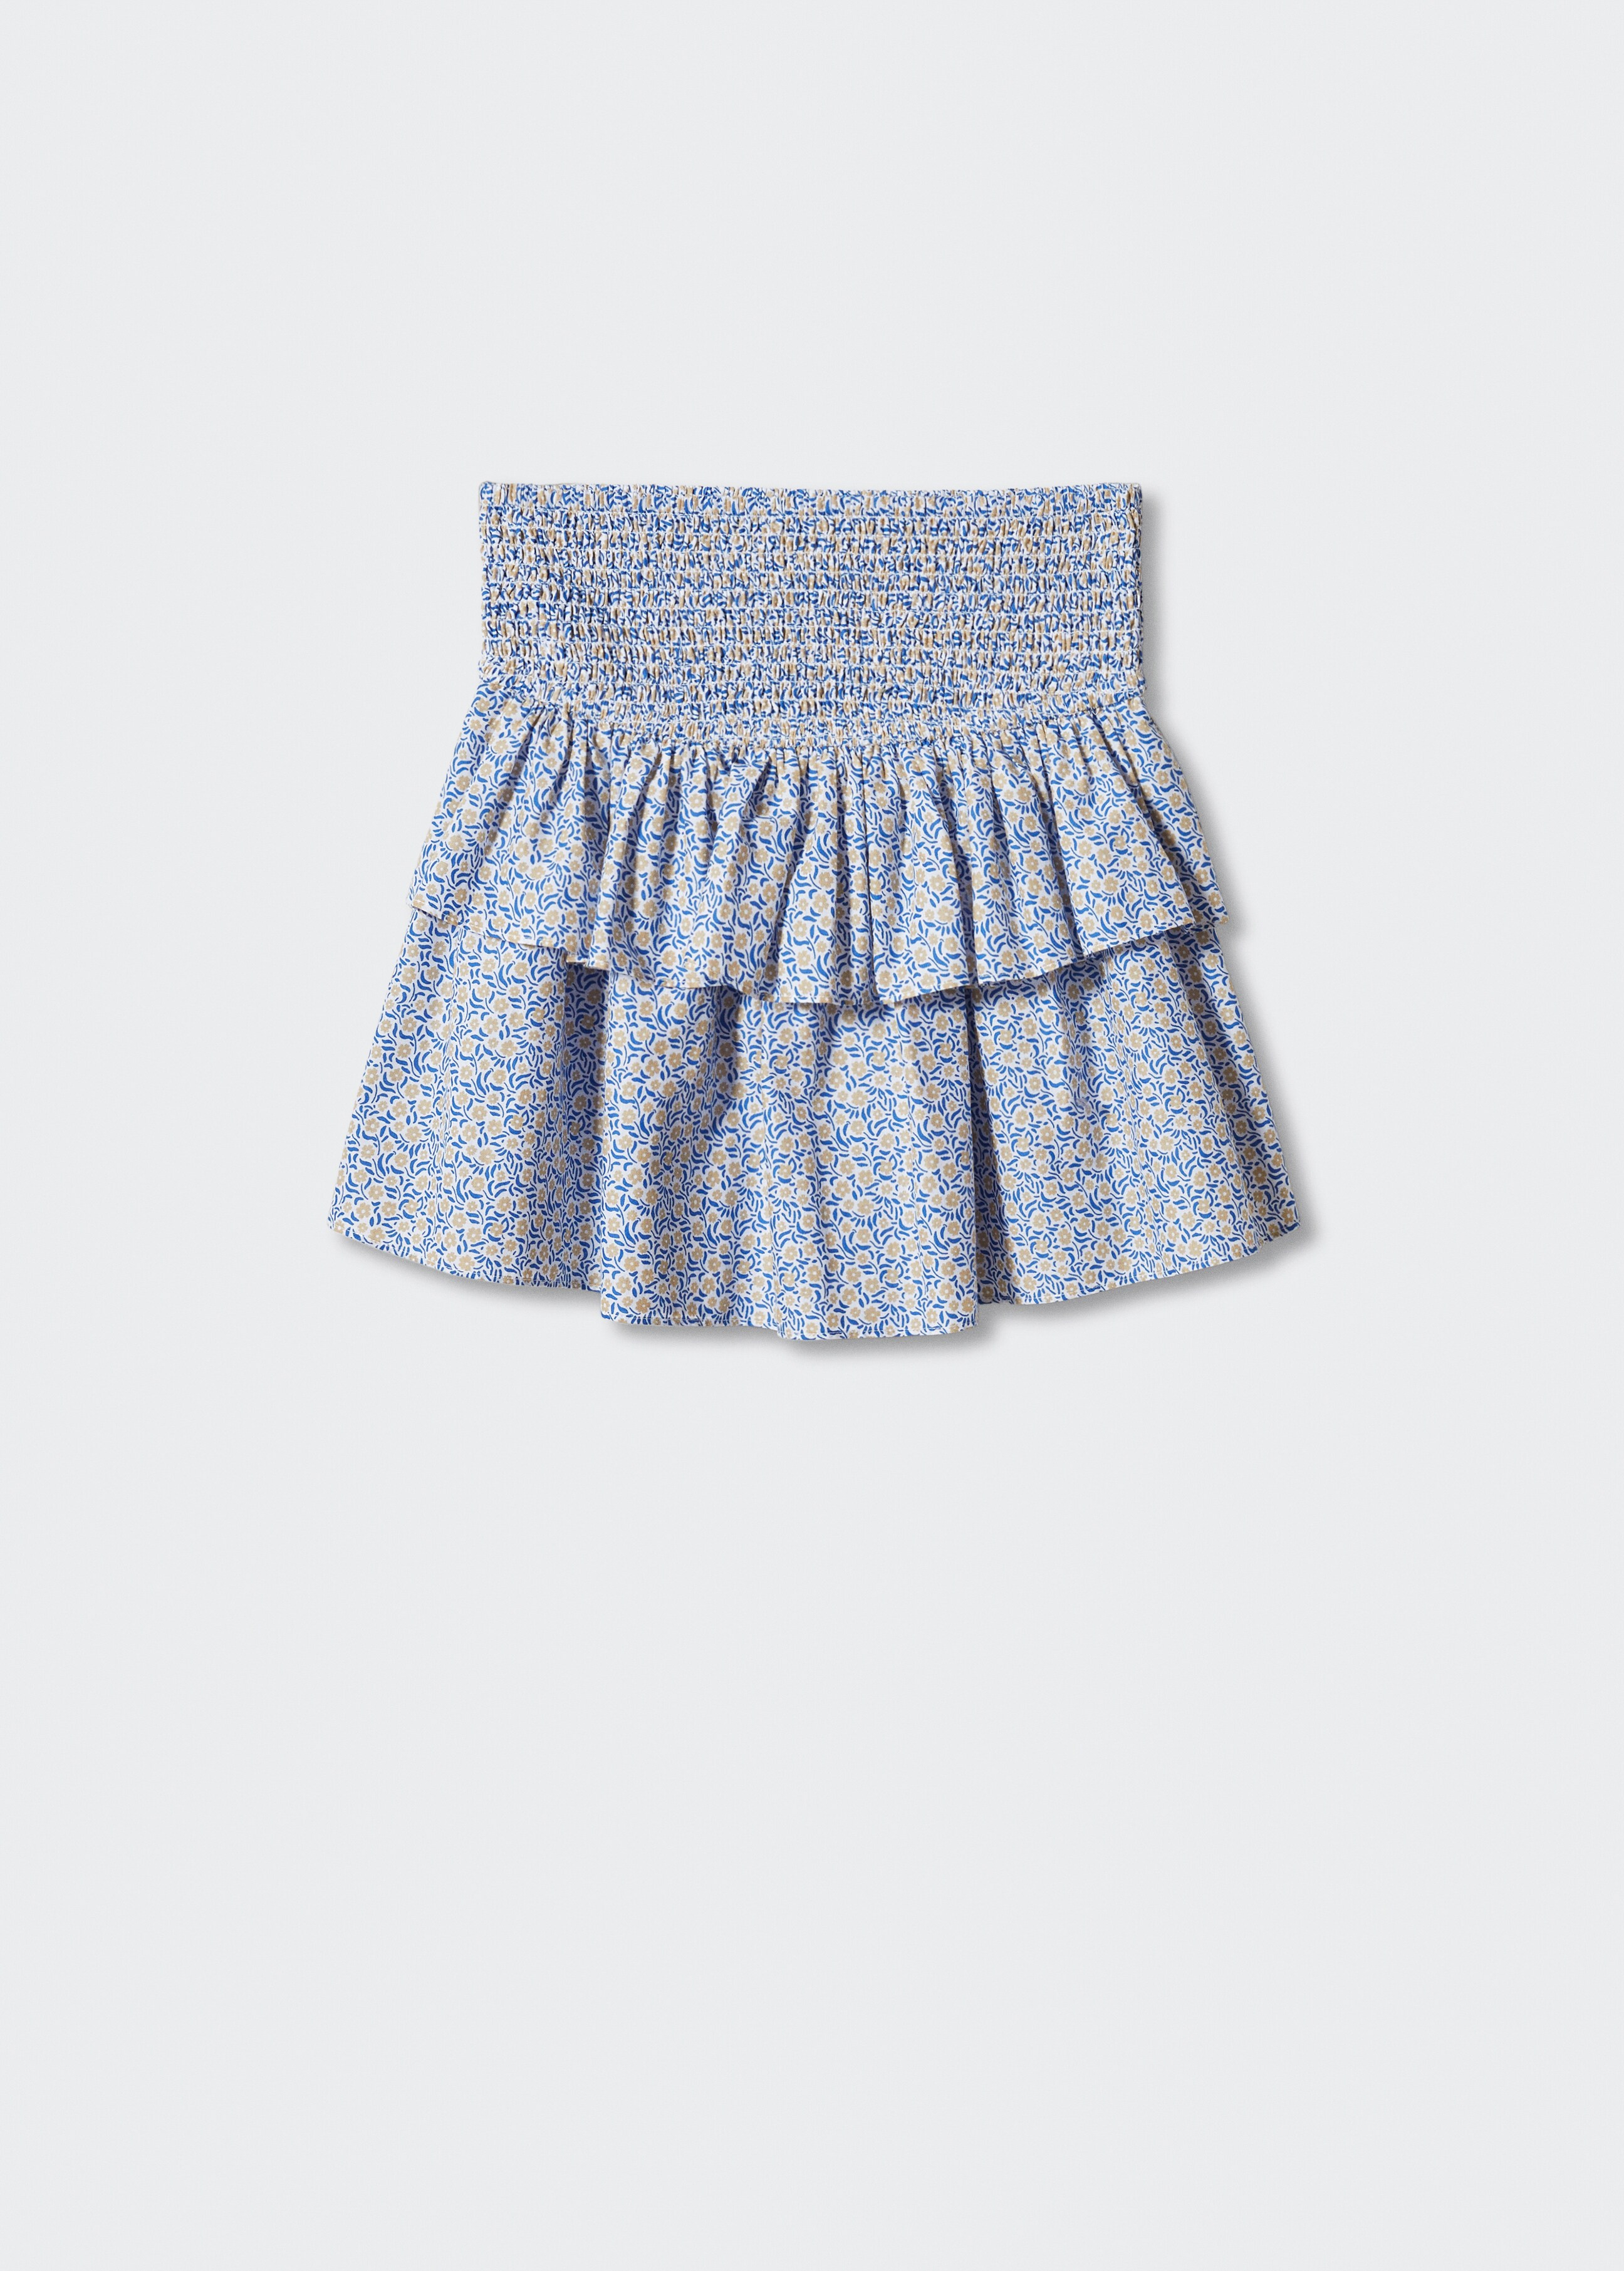 Printed skirt with ruffles - Article without model